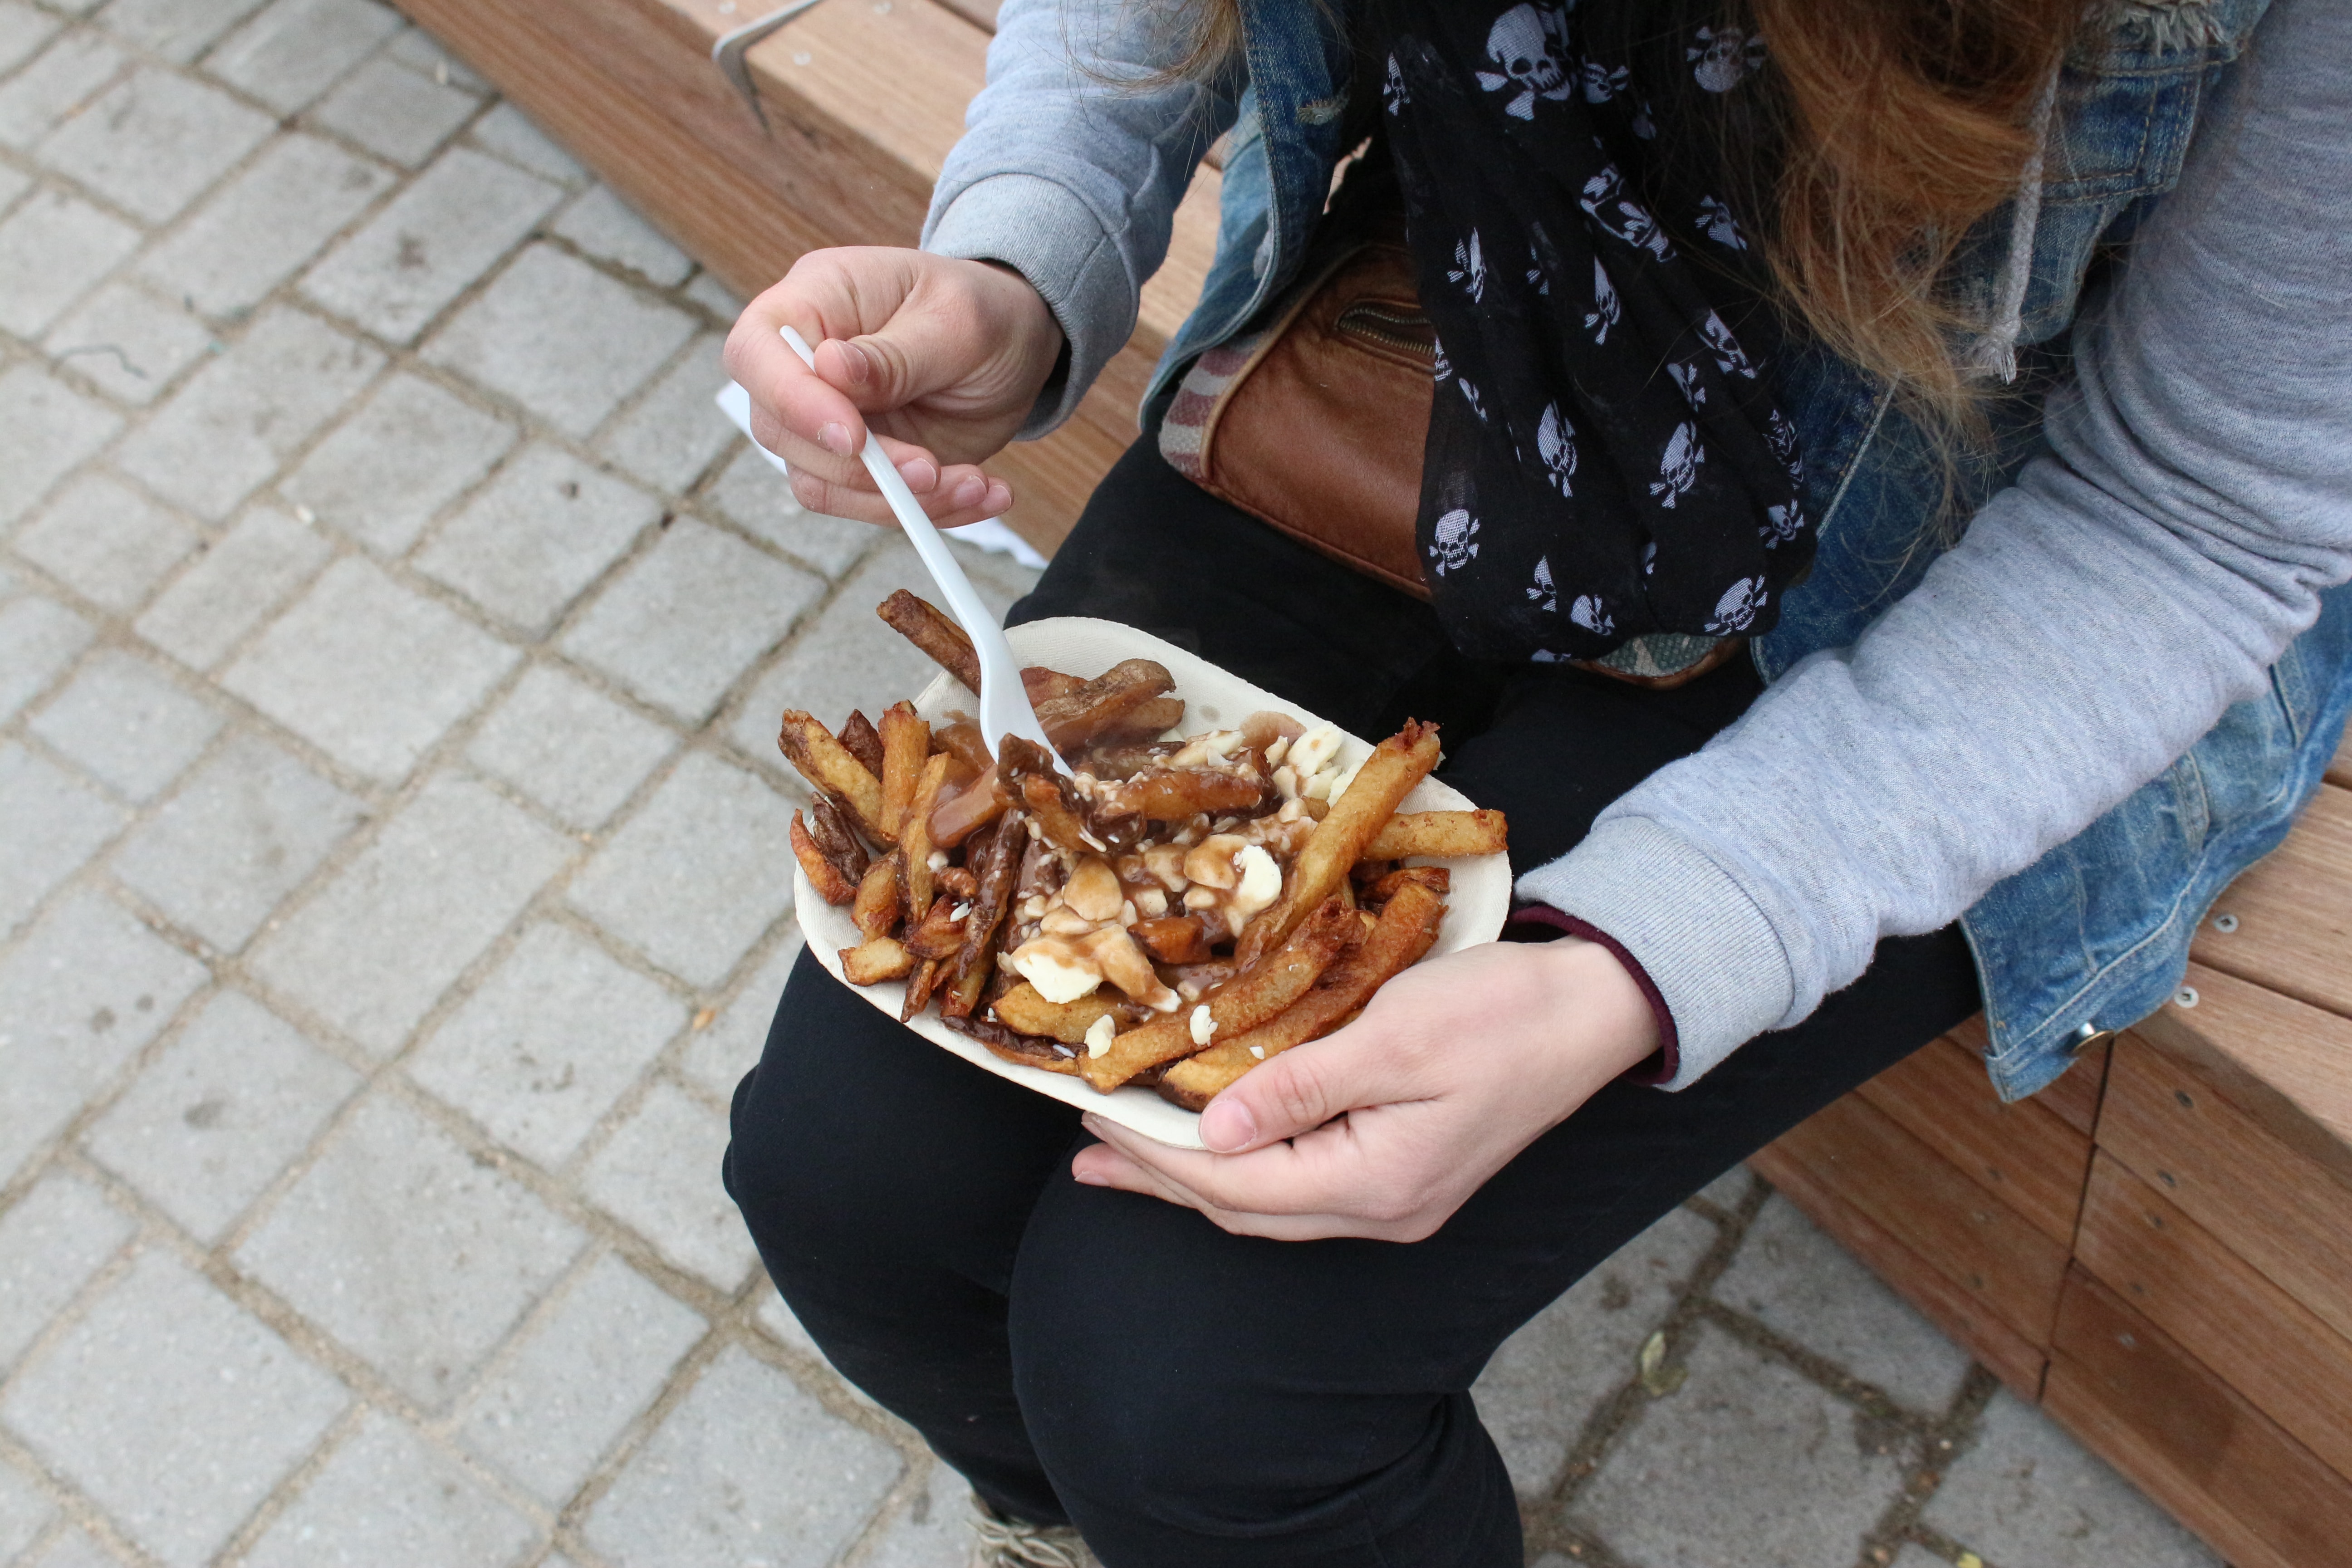 A mouthwatering image of Canadian poutine, featuring golden crispy fries topped with cheese curds and smothered in savory gravy.